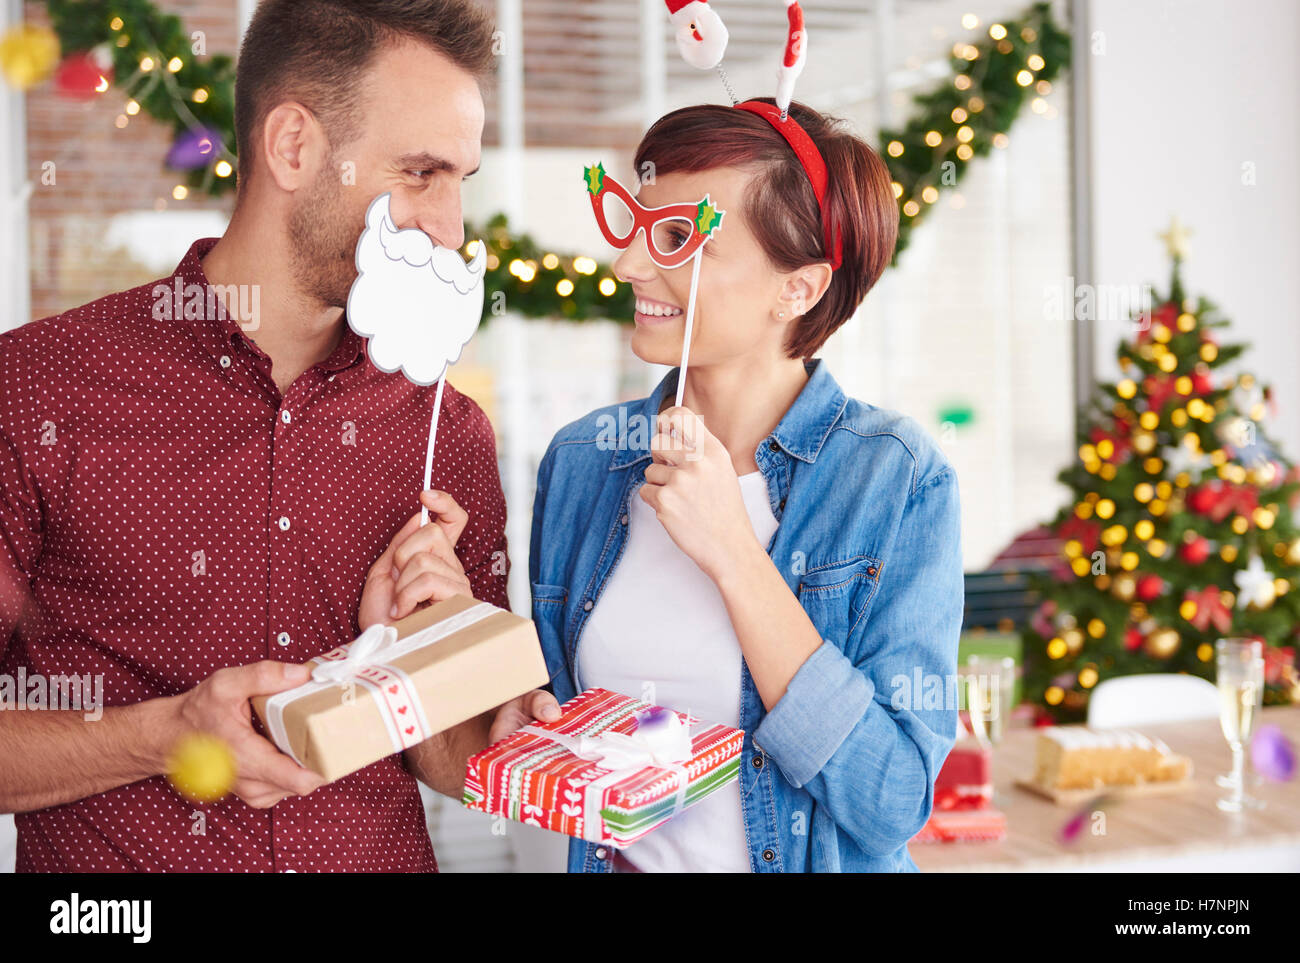 Having fun at Christmas office party Stock Photo